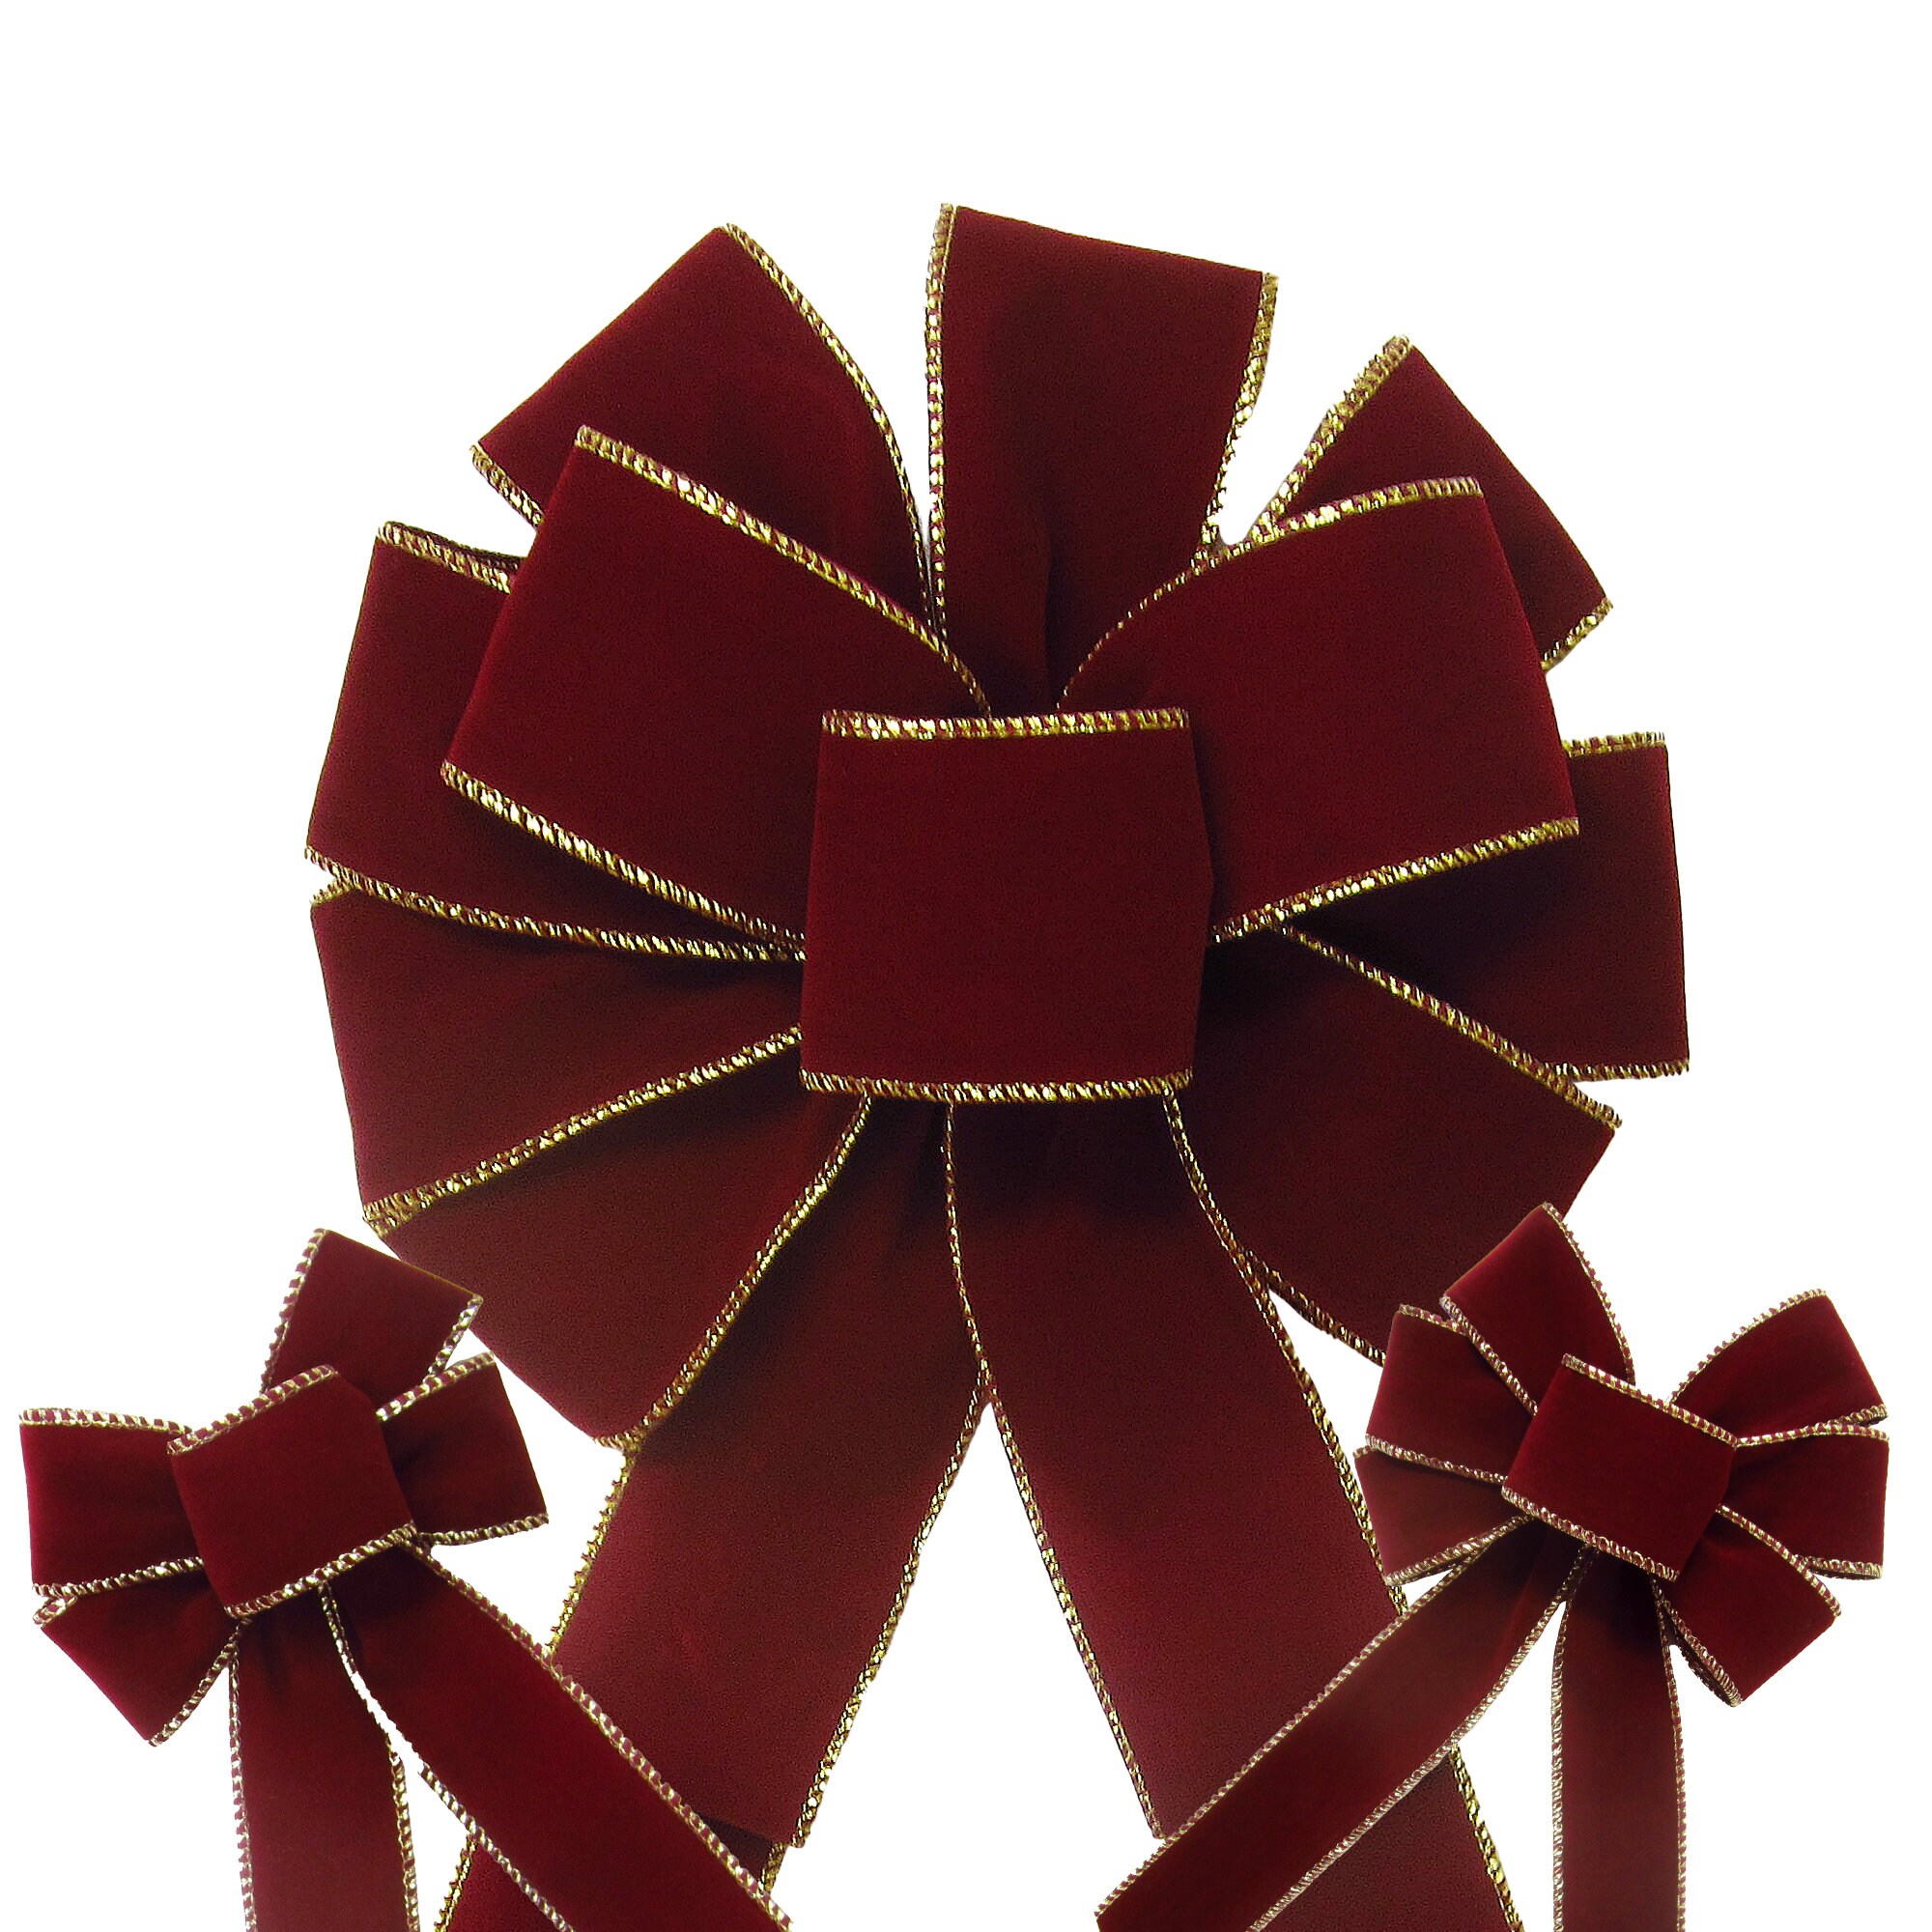 4 Loop Indoor/Outdoor Velvet Christmas Hand-Tied Bows, Sold By the